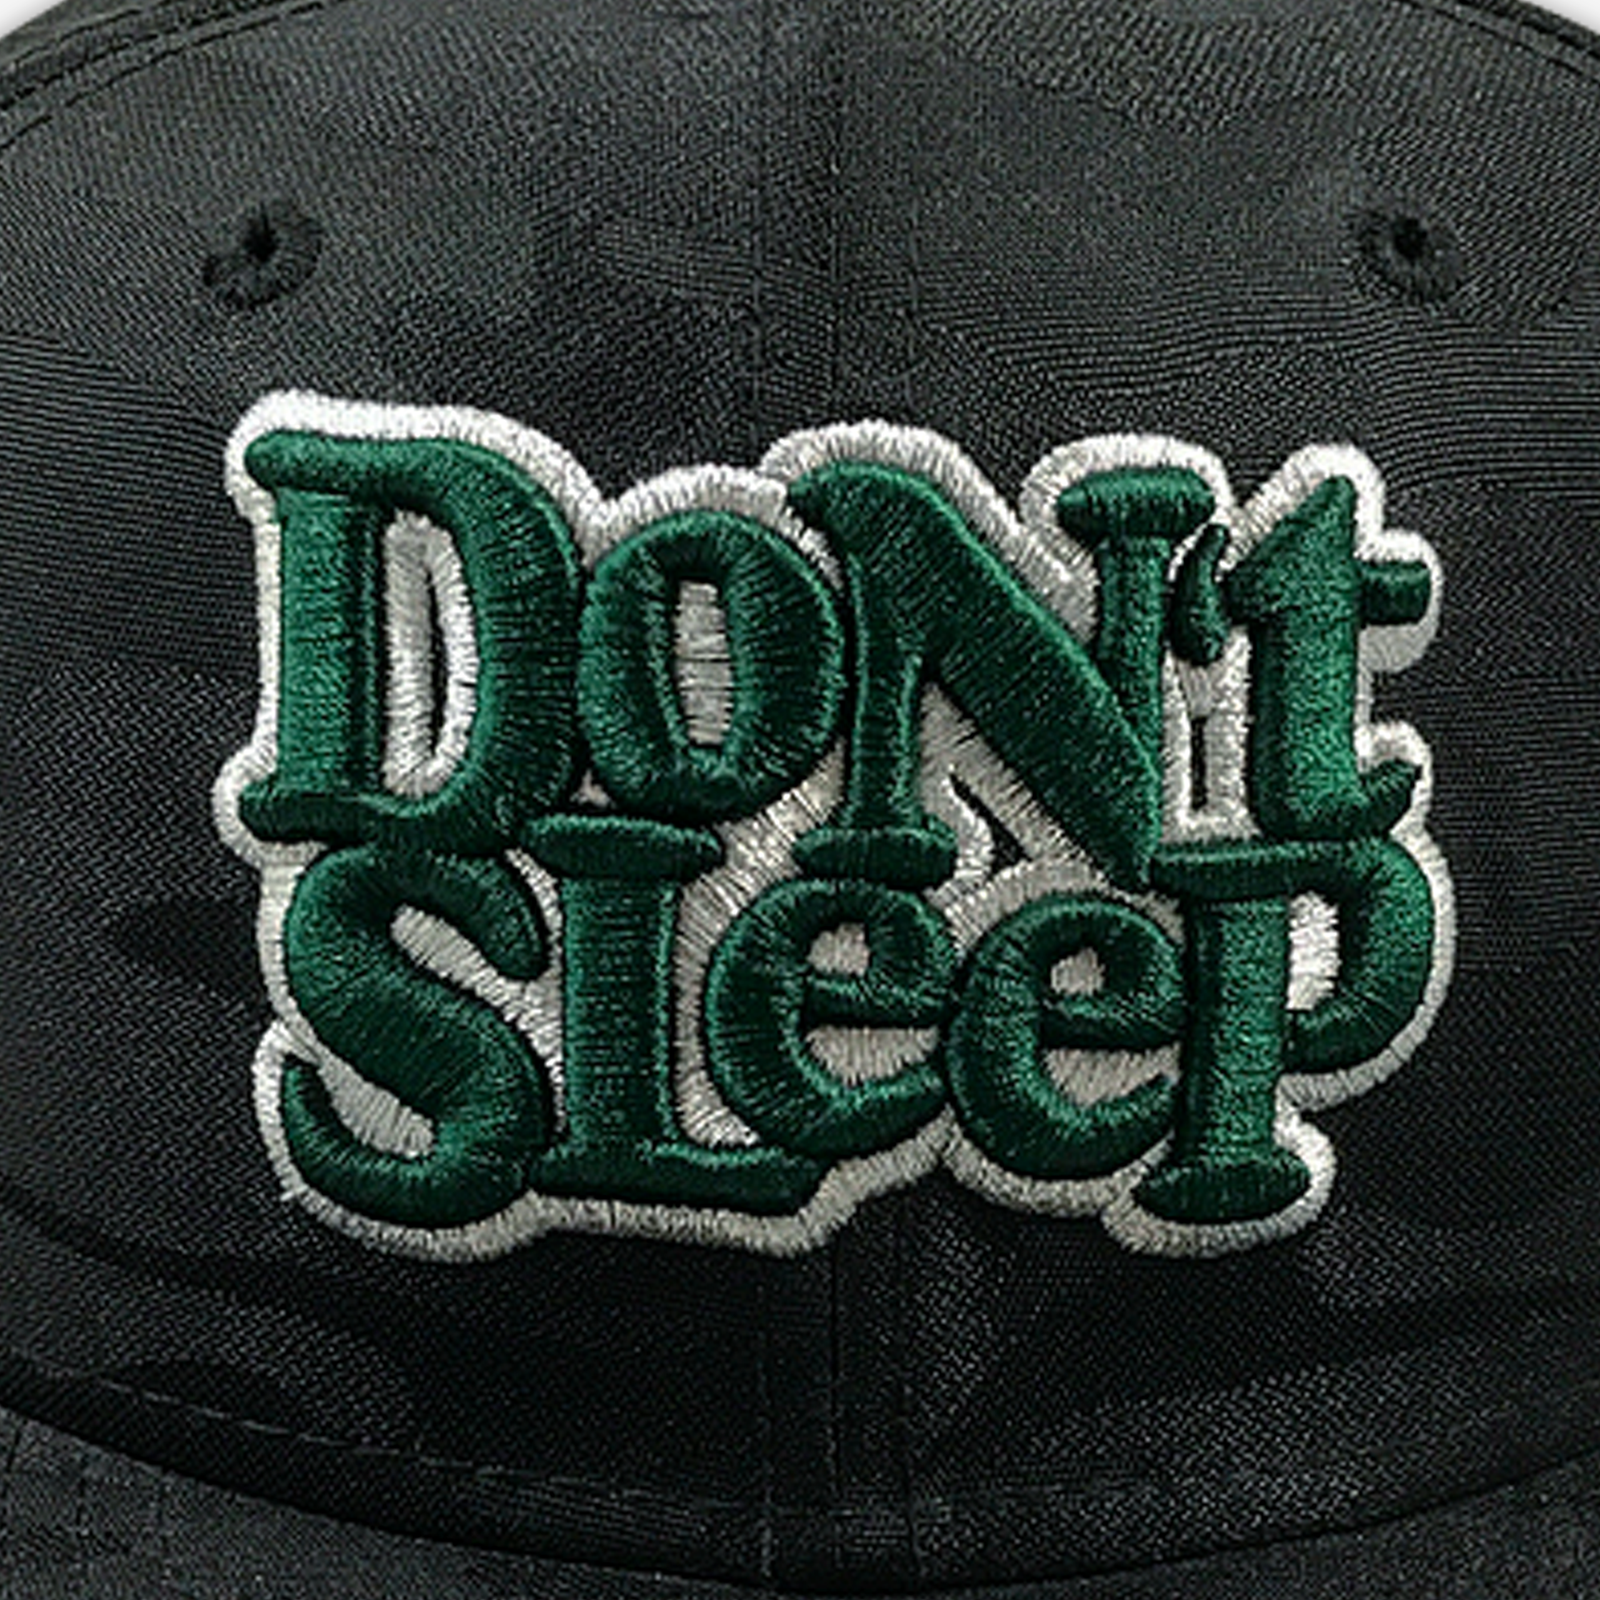 Dont Sleep AOF x Lightsleepers New Era Fitted